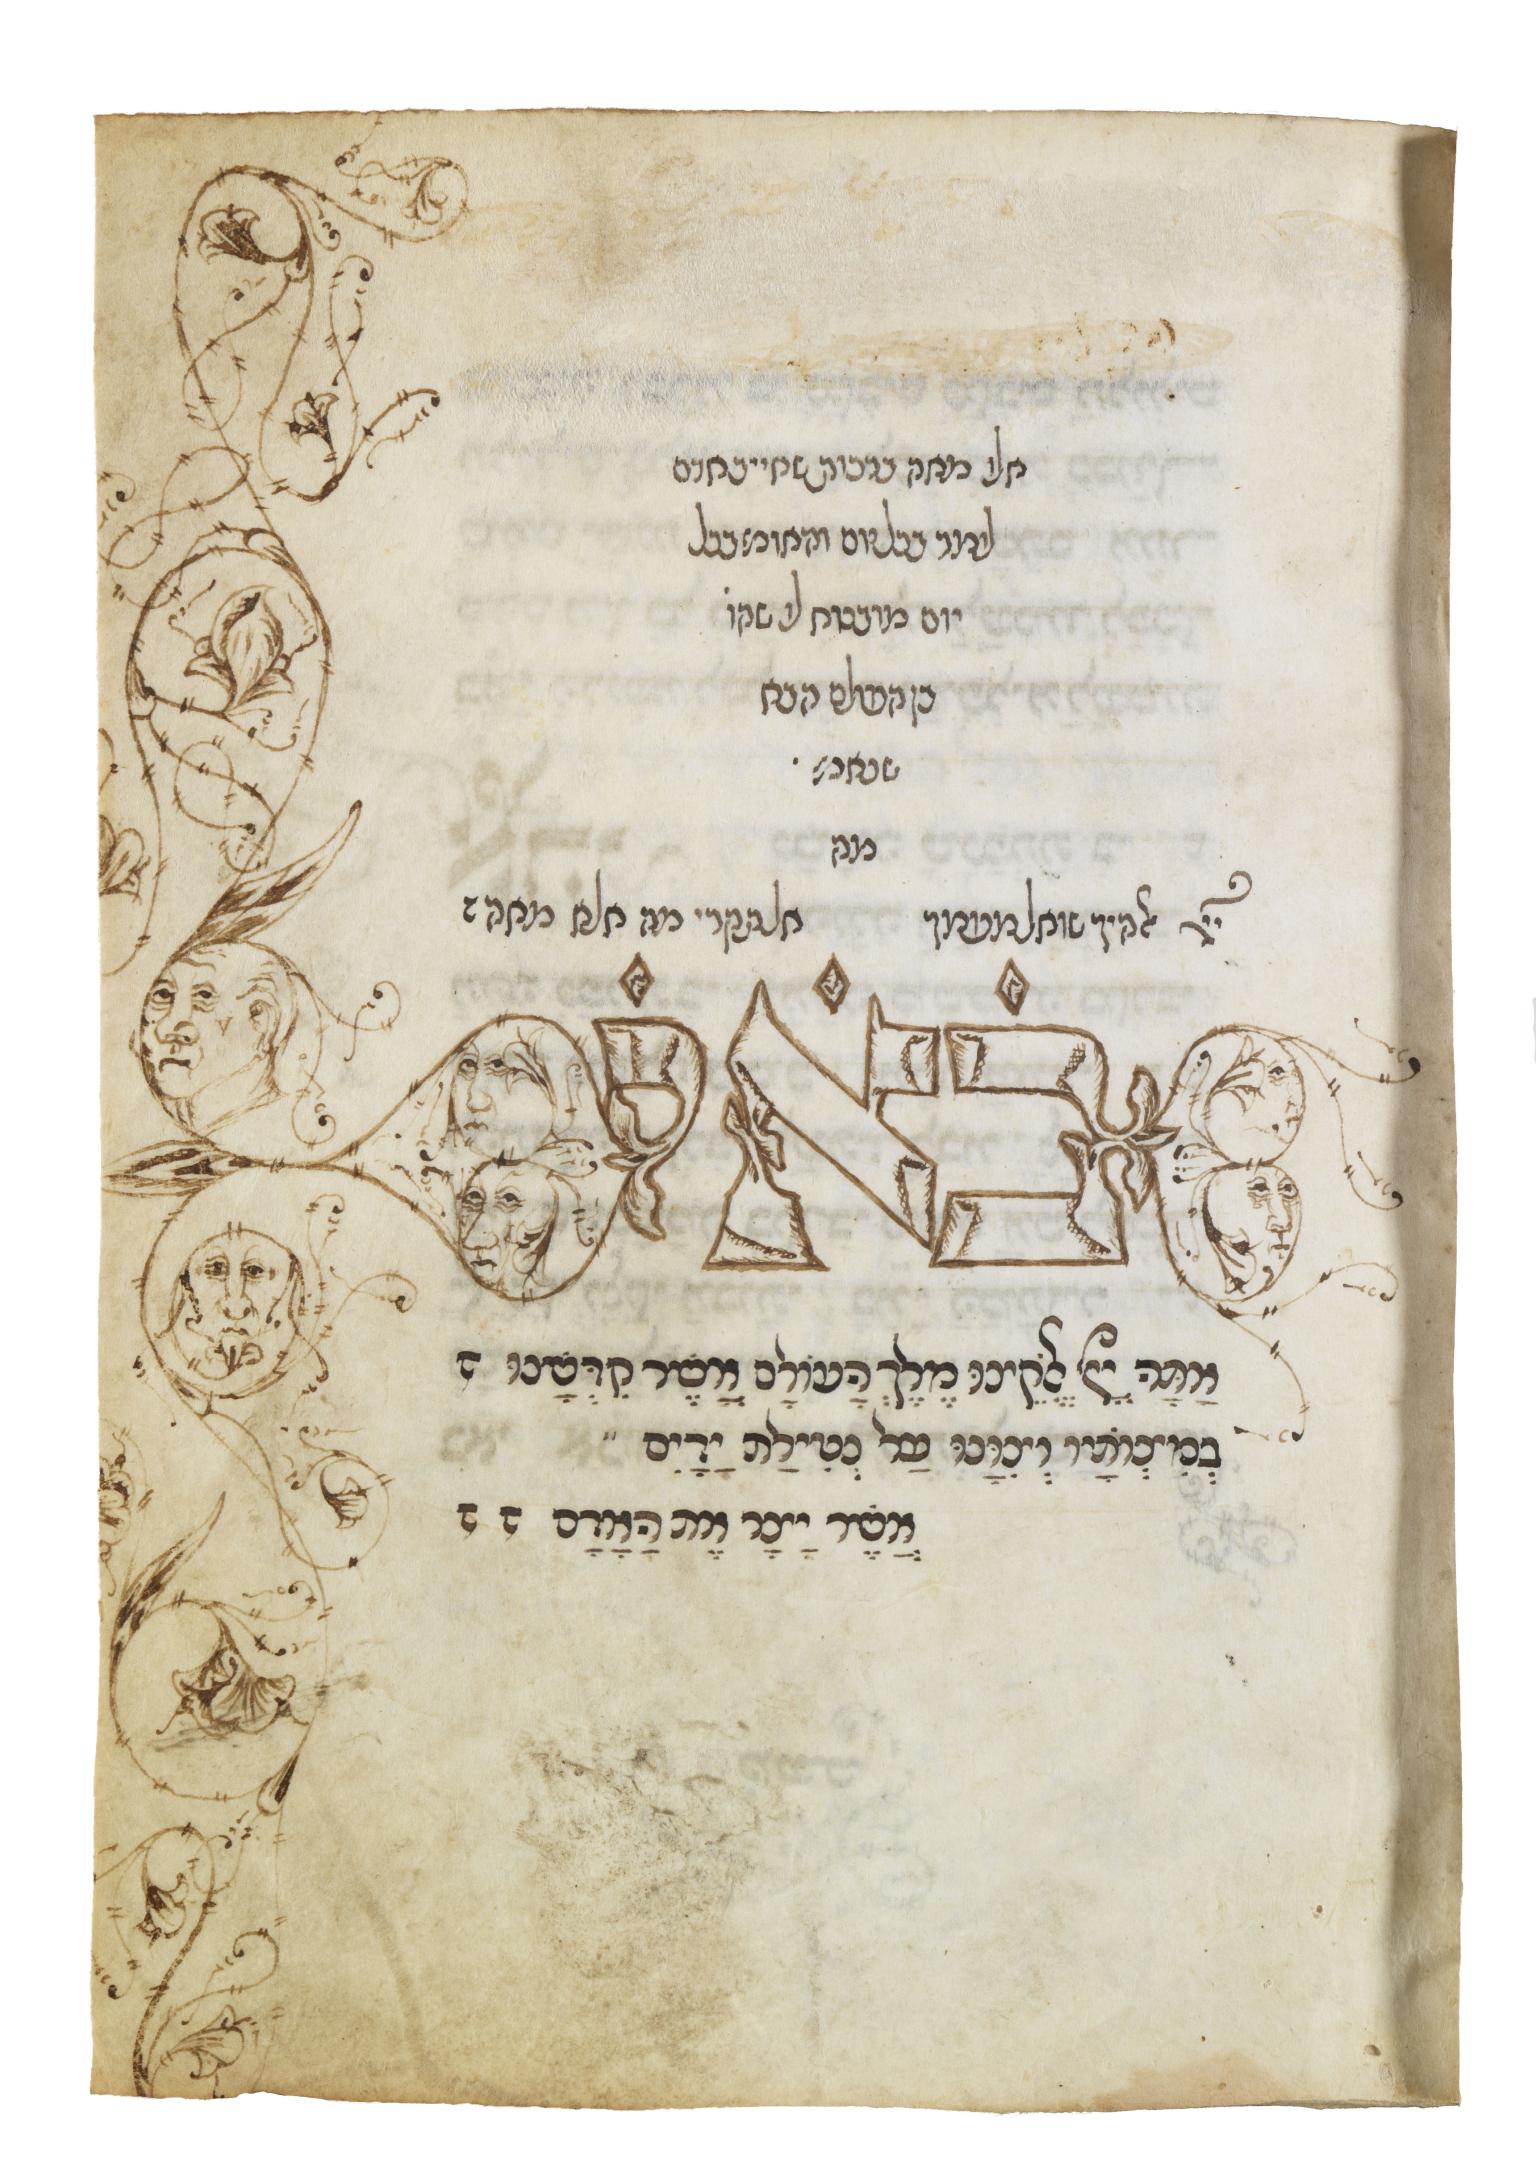 Manuscript page with Hebrew writing in triangular pattern on top, large Hebrew word in center, some Hebrew text below, and faces drawn on left margin. 